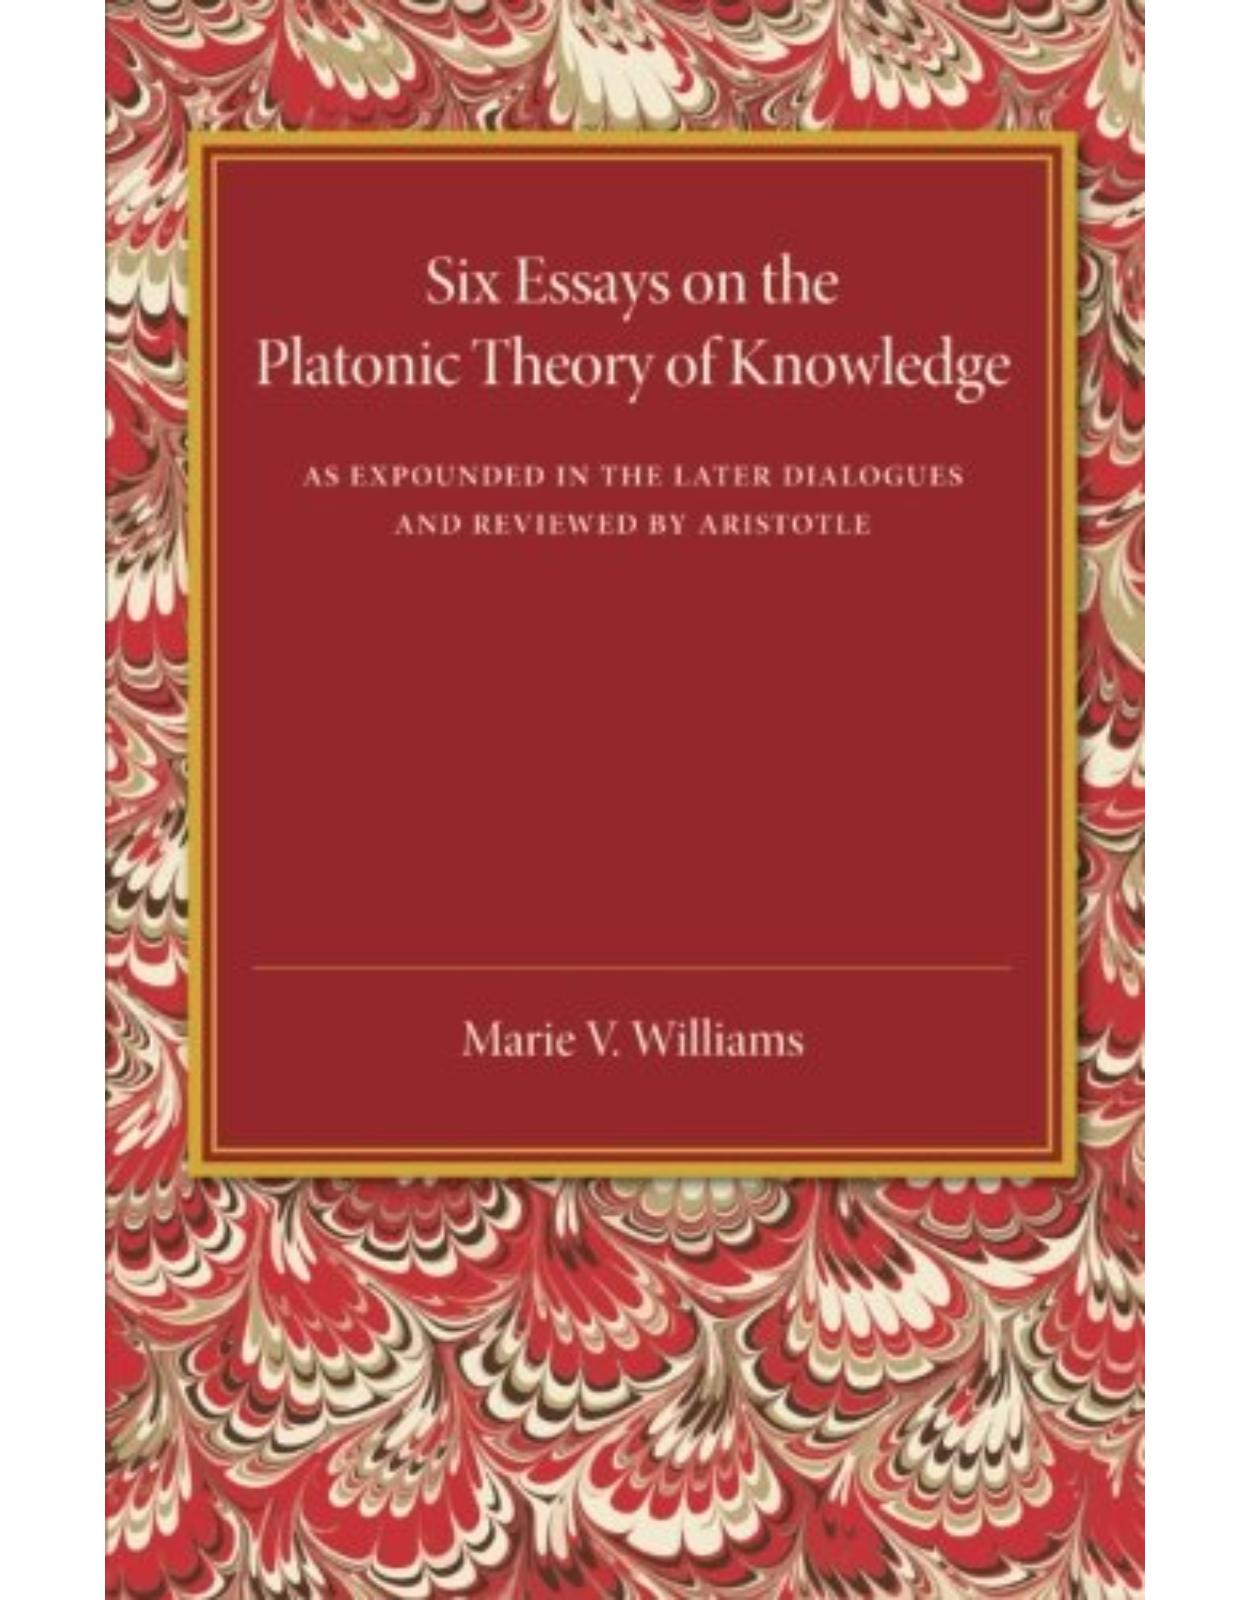 Six Essays on the Platonic Theory of Knowledge: As Expounded in the Later Dialogues and Reviewed by Aristotle